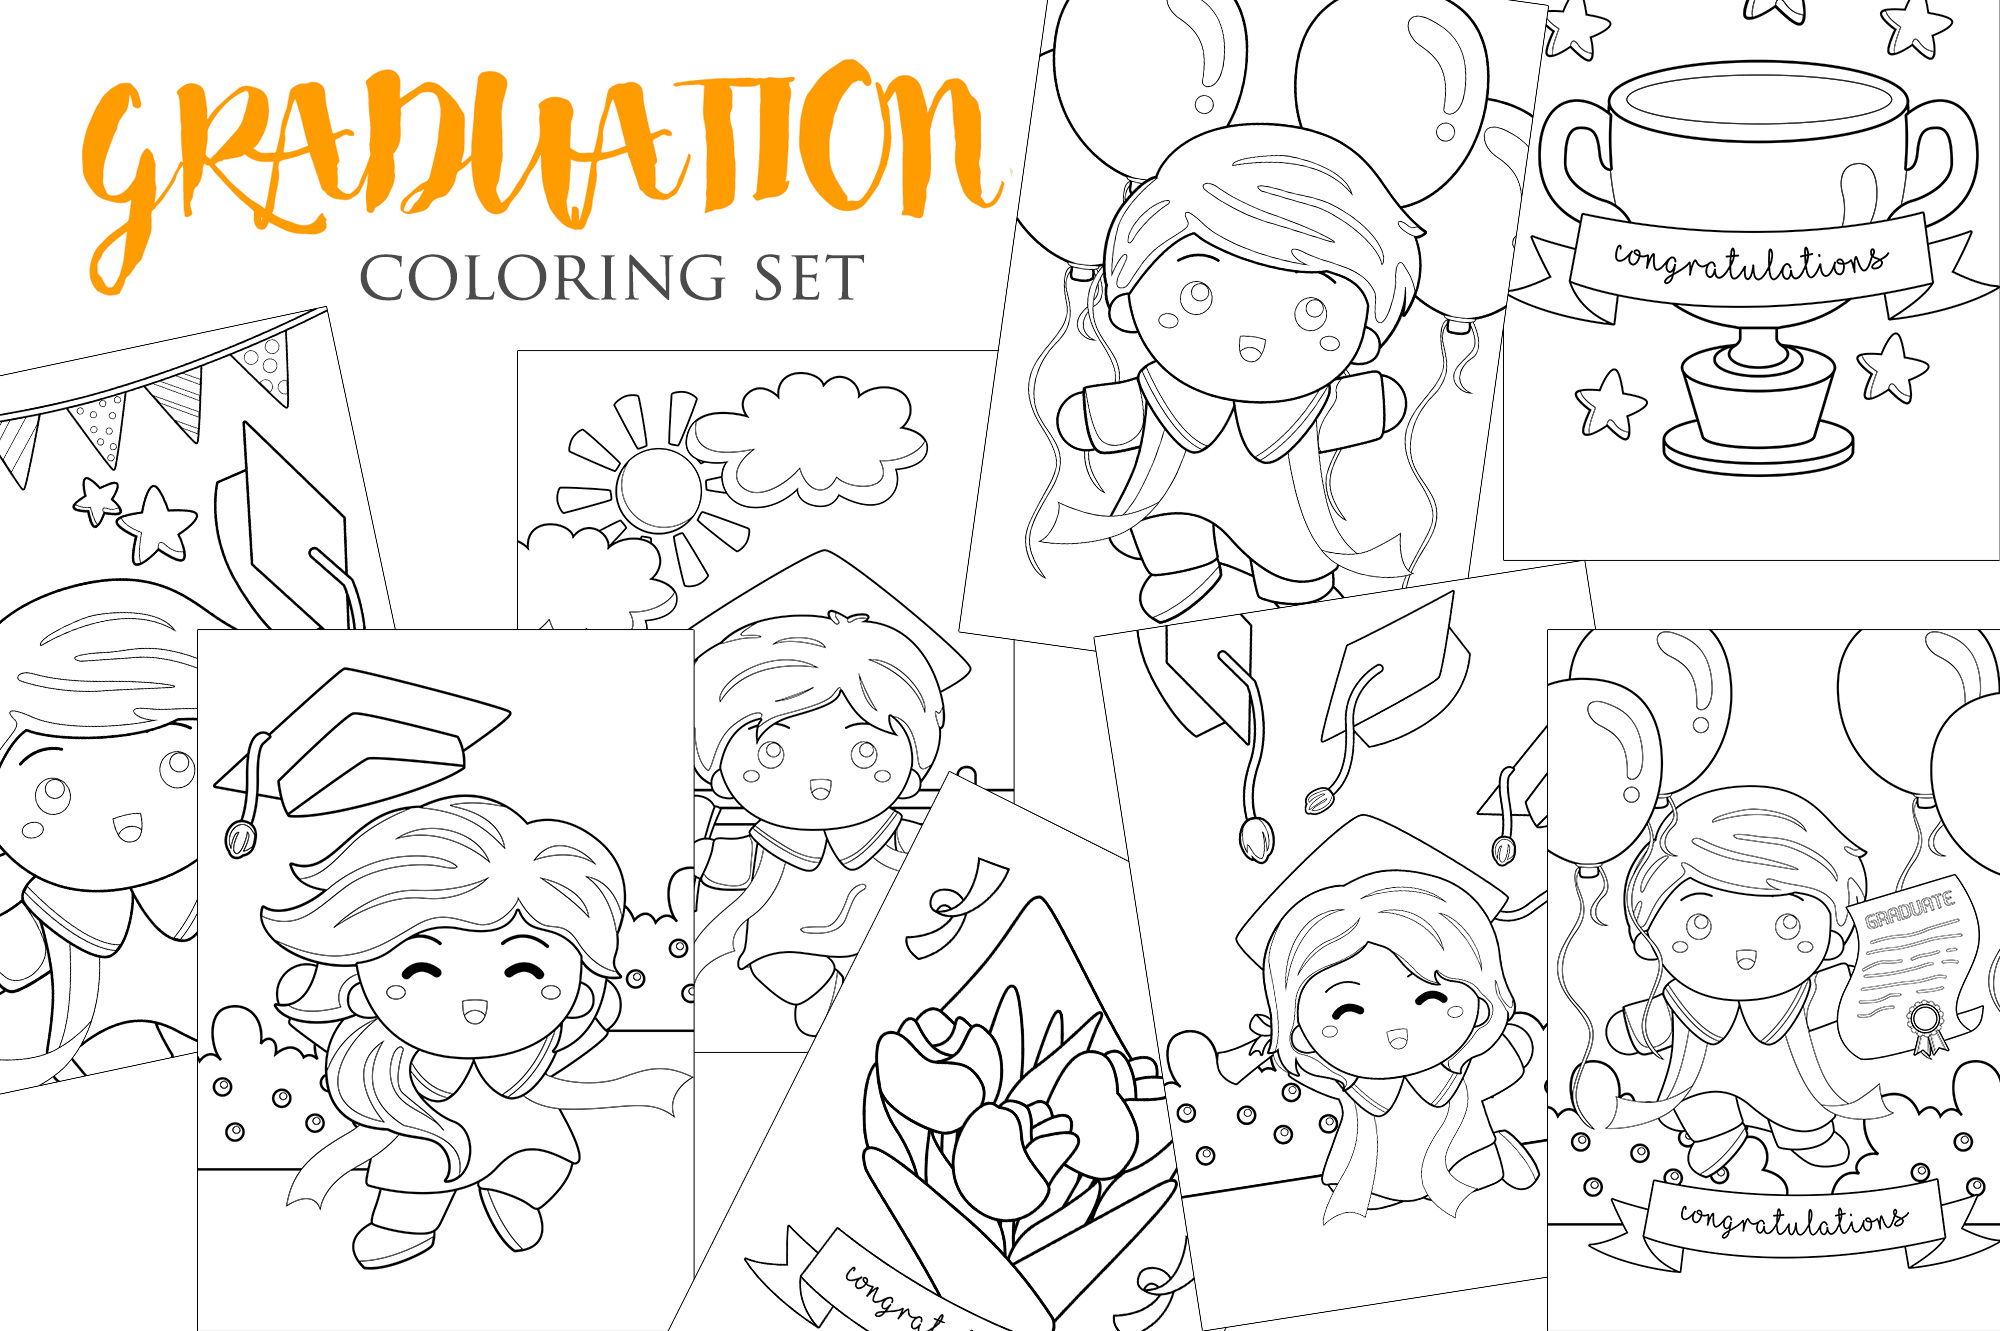 Set of coloring pages for children of different ages.